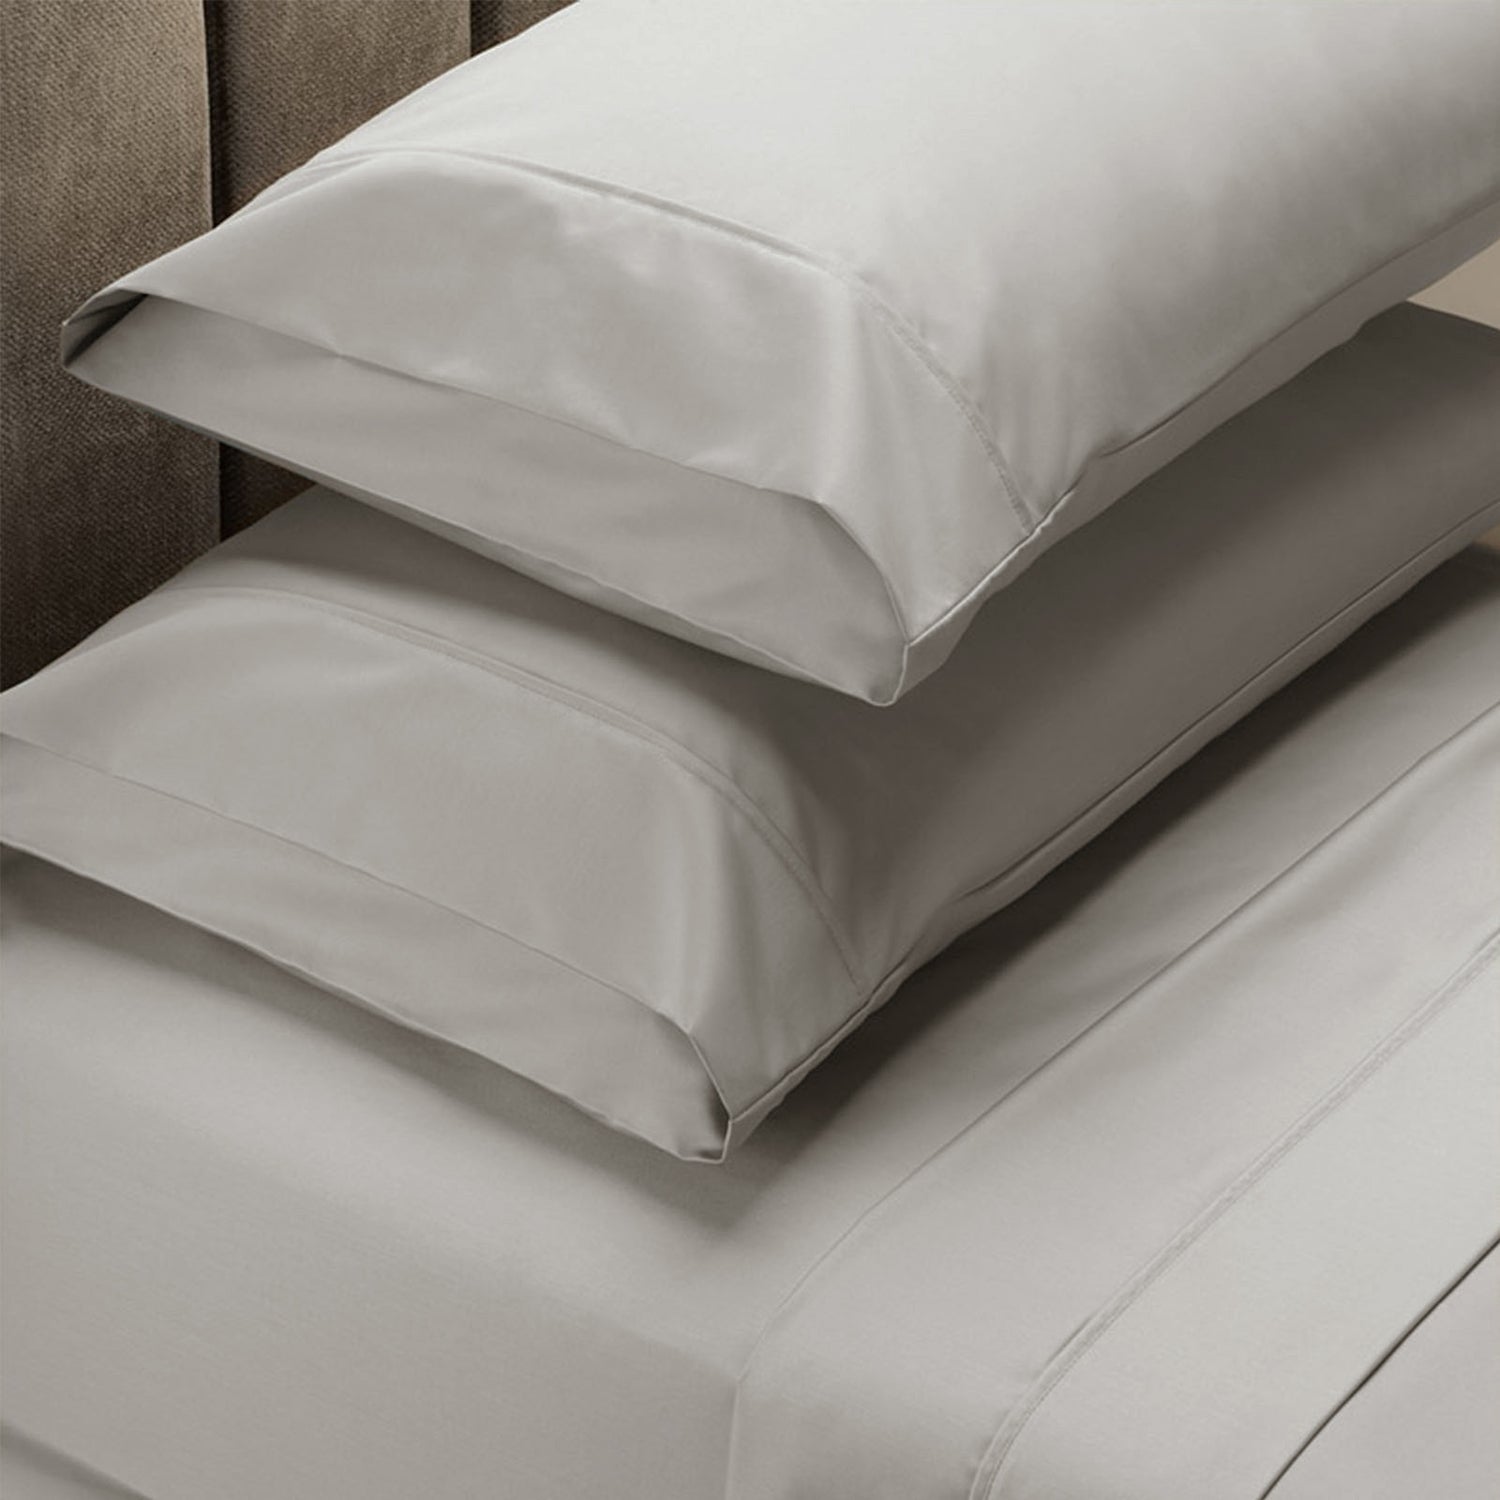 Royal Comfort 1000 Thread Count Sheet Set Cotton Blend Ultra Soft Touch Bedding-Bed Linen-PEROZ Accessories